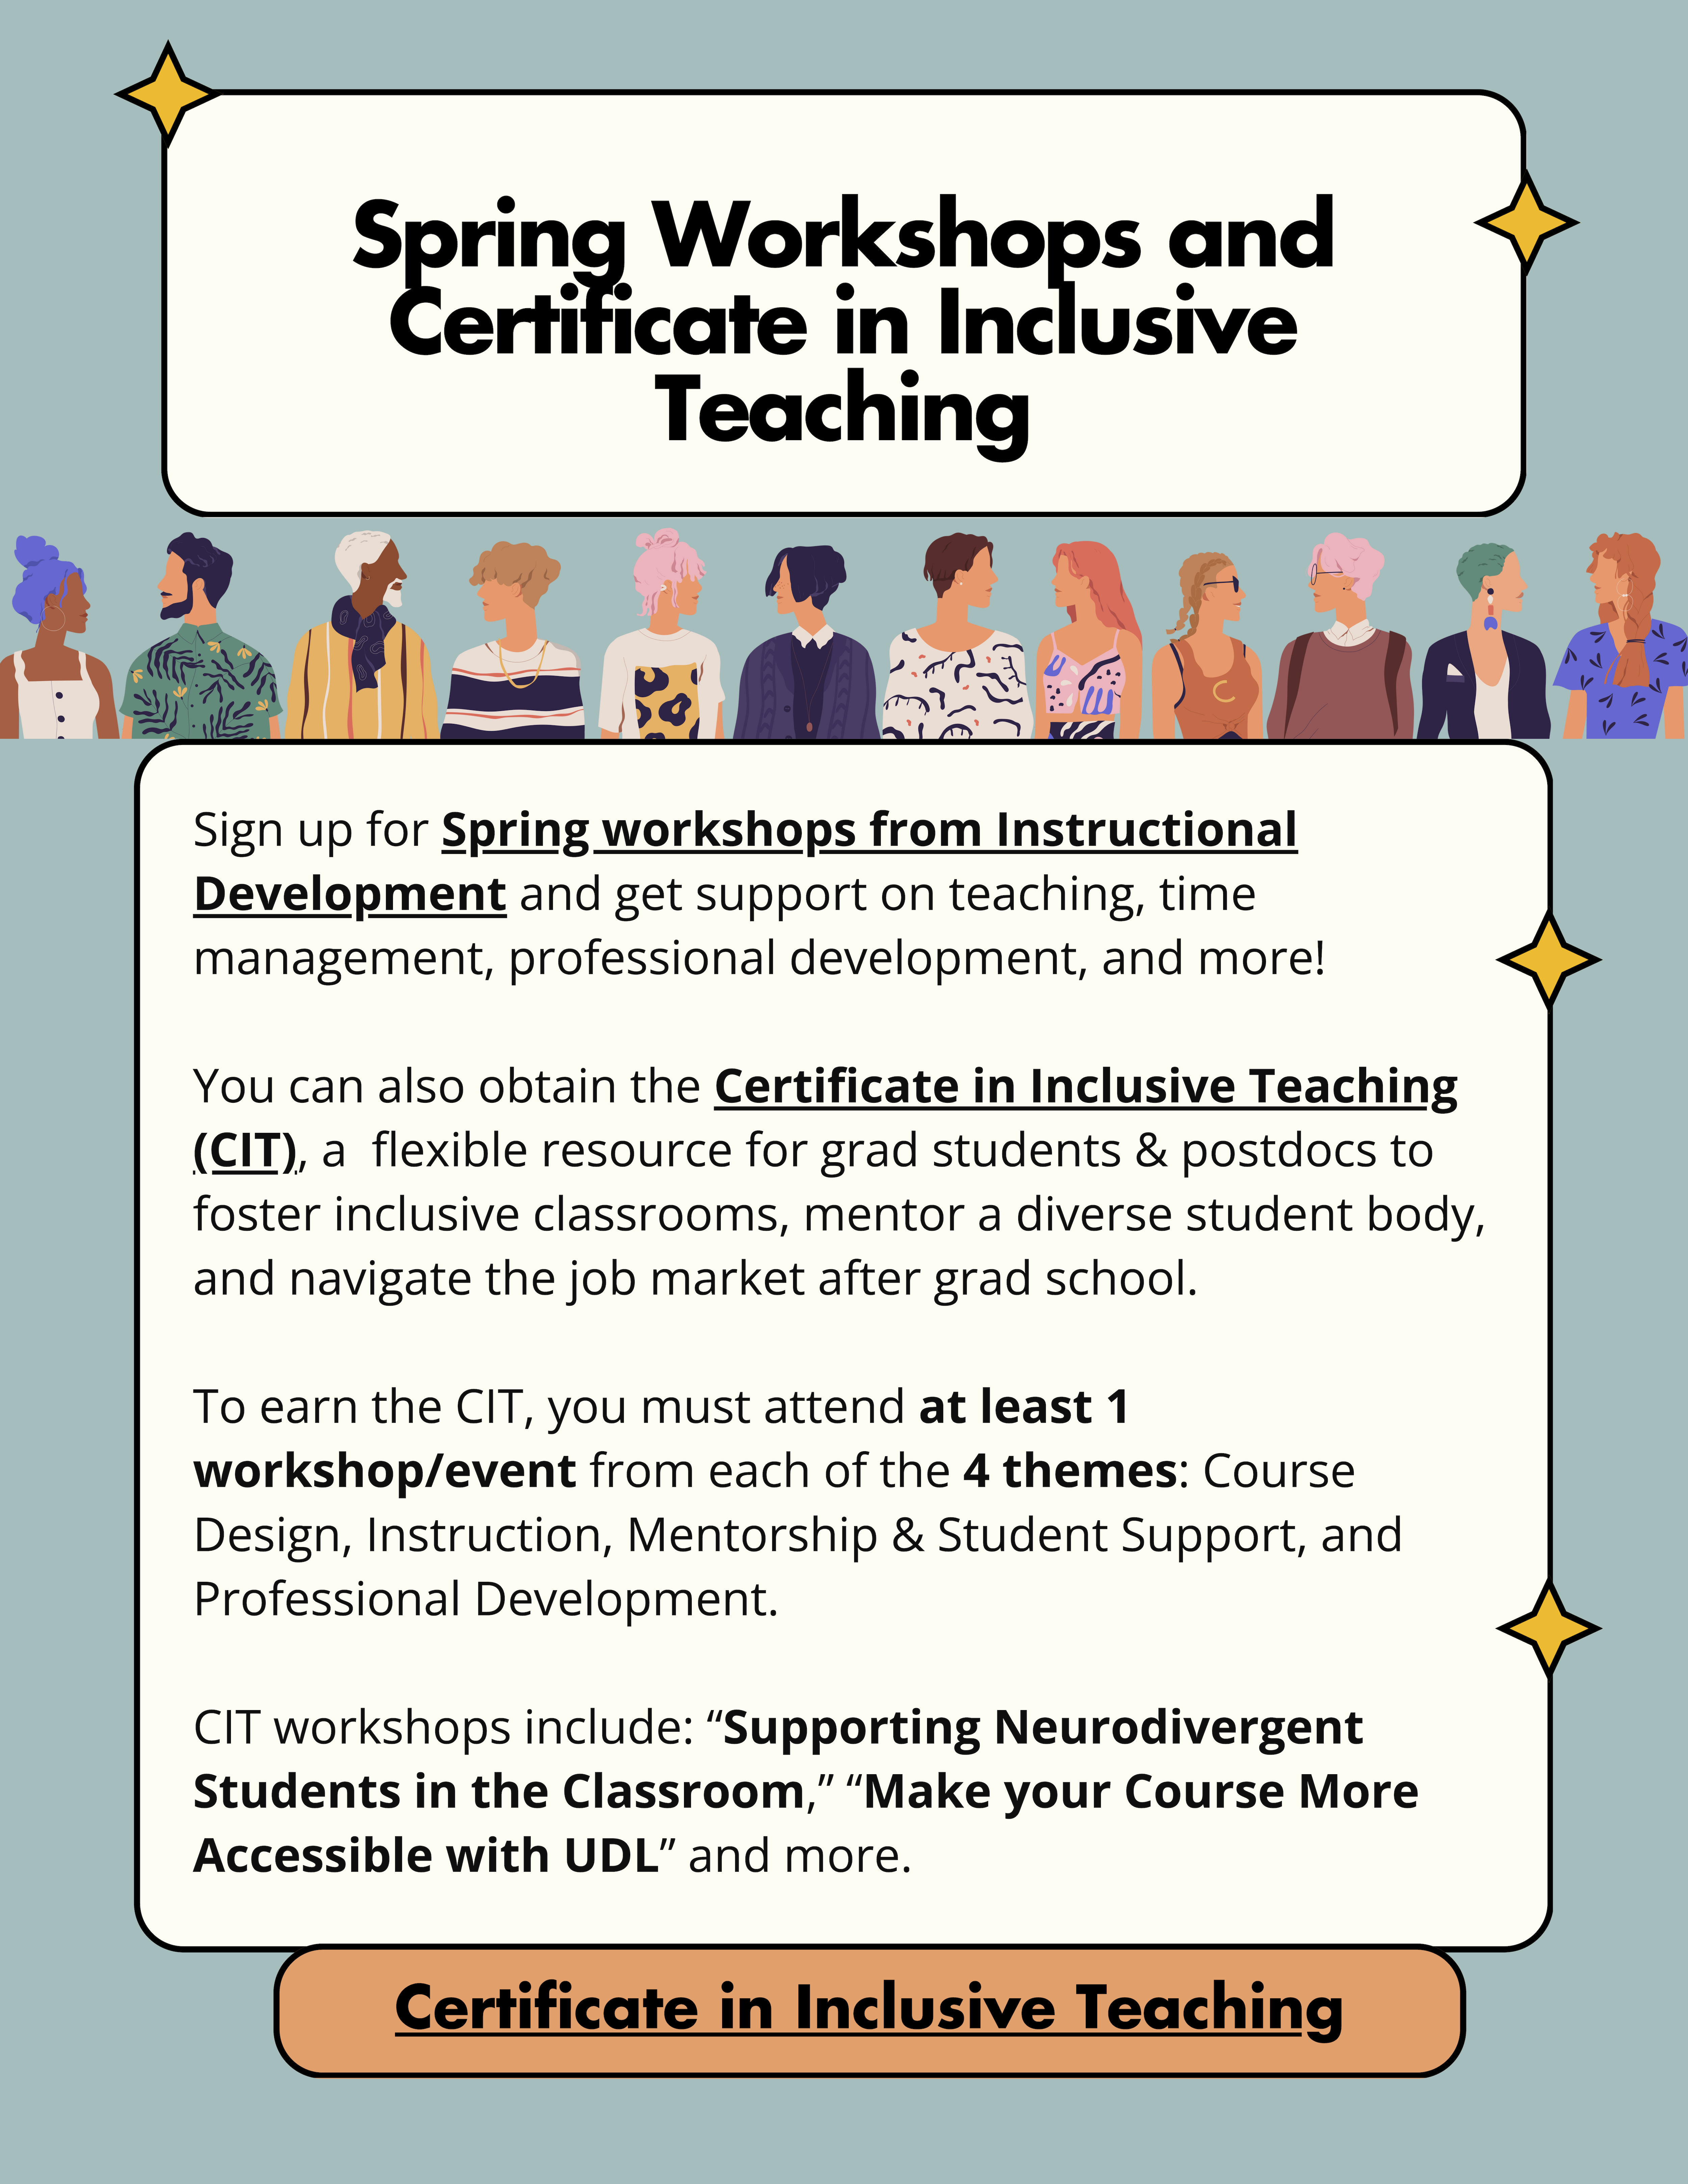 Spring Workshops and Certificate in Inclusive Teaching